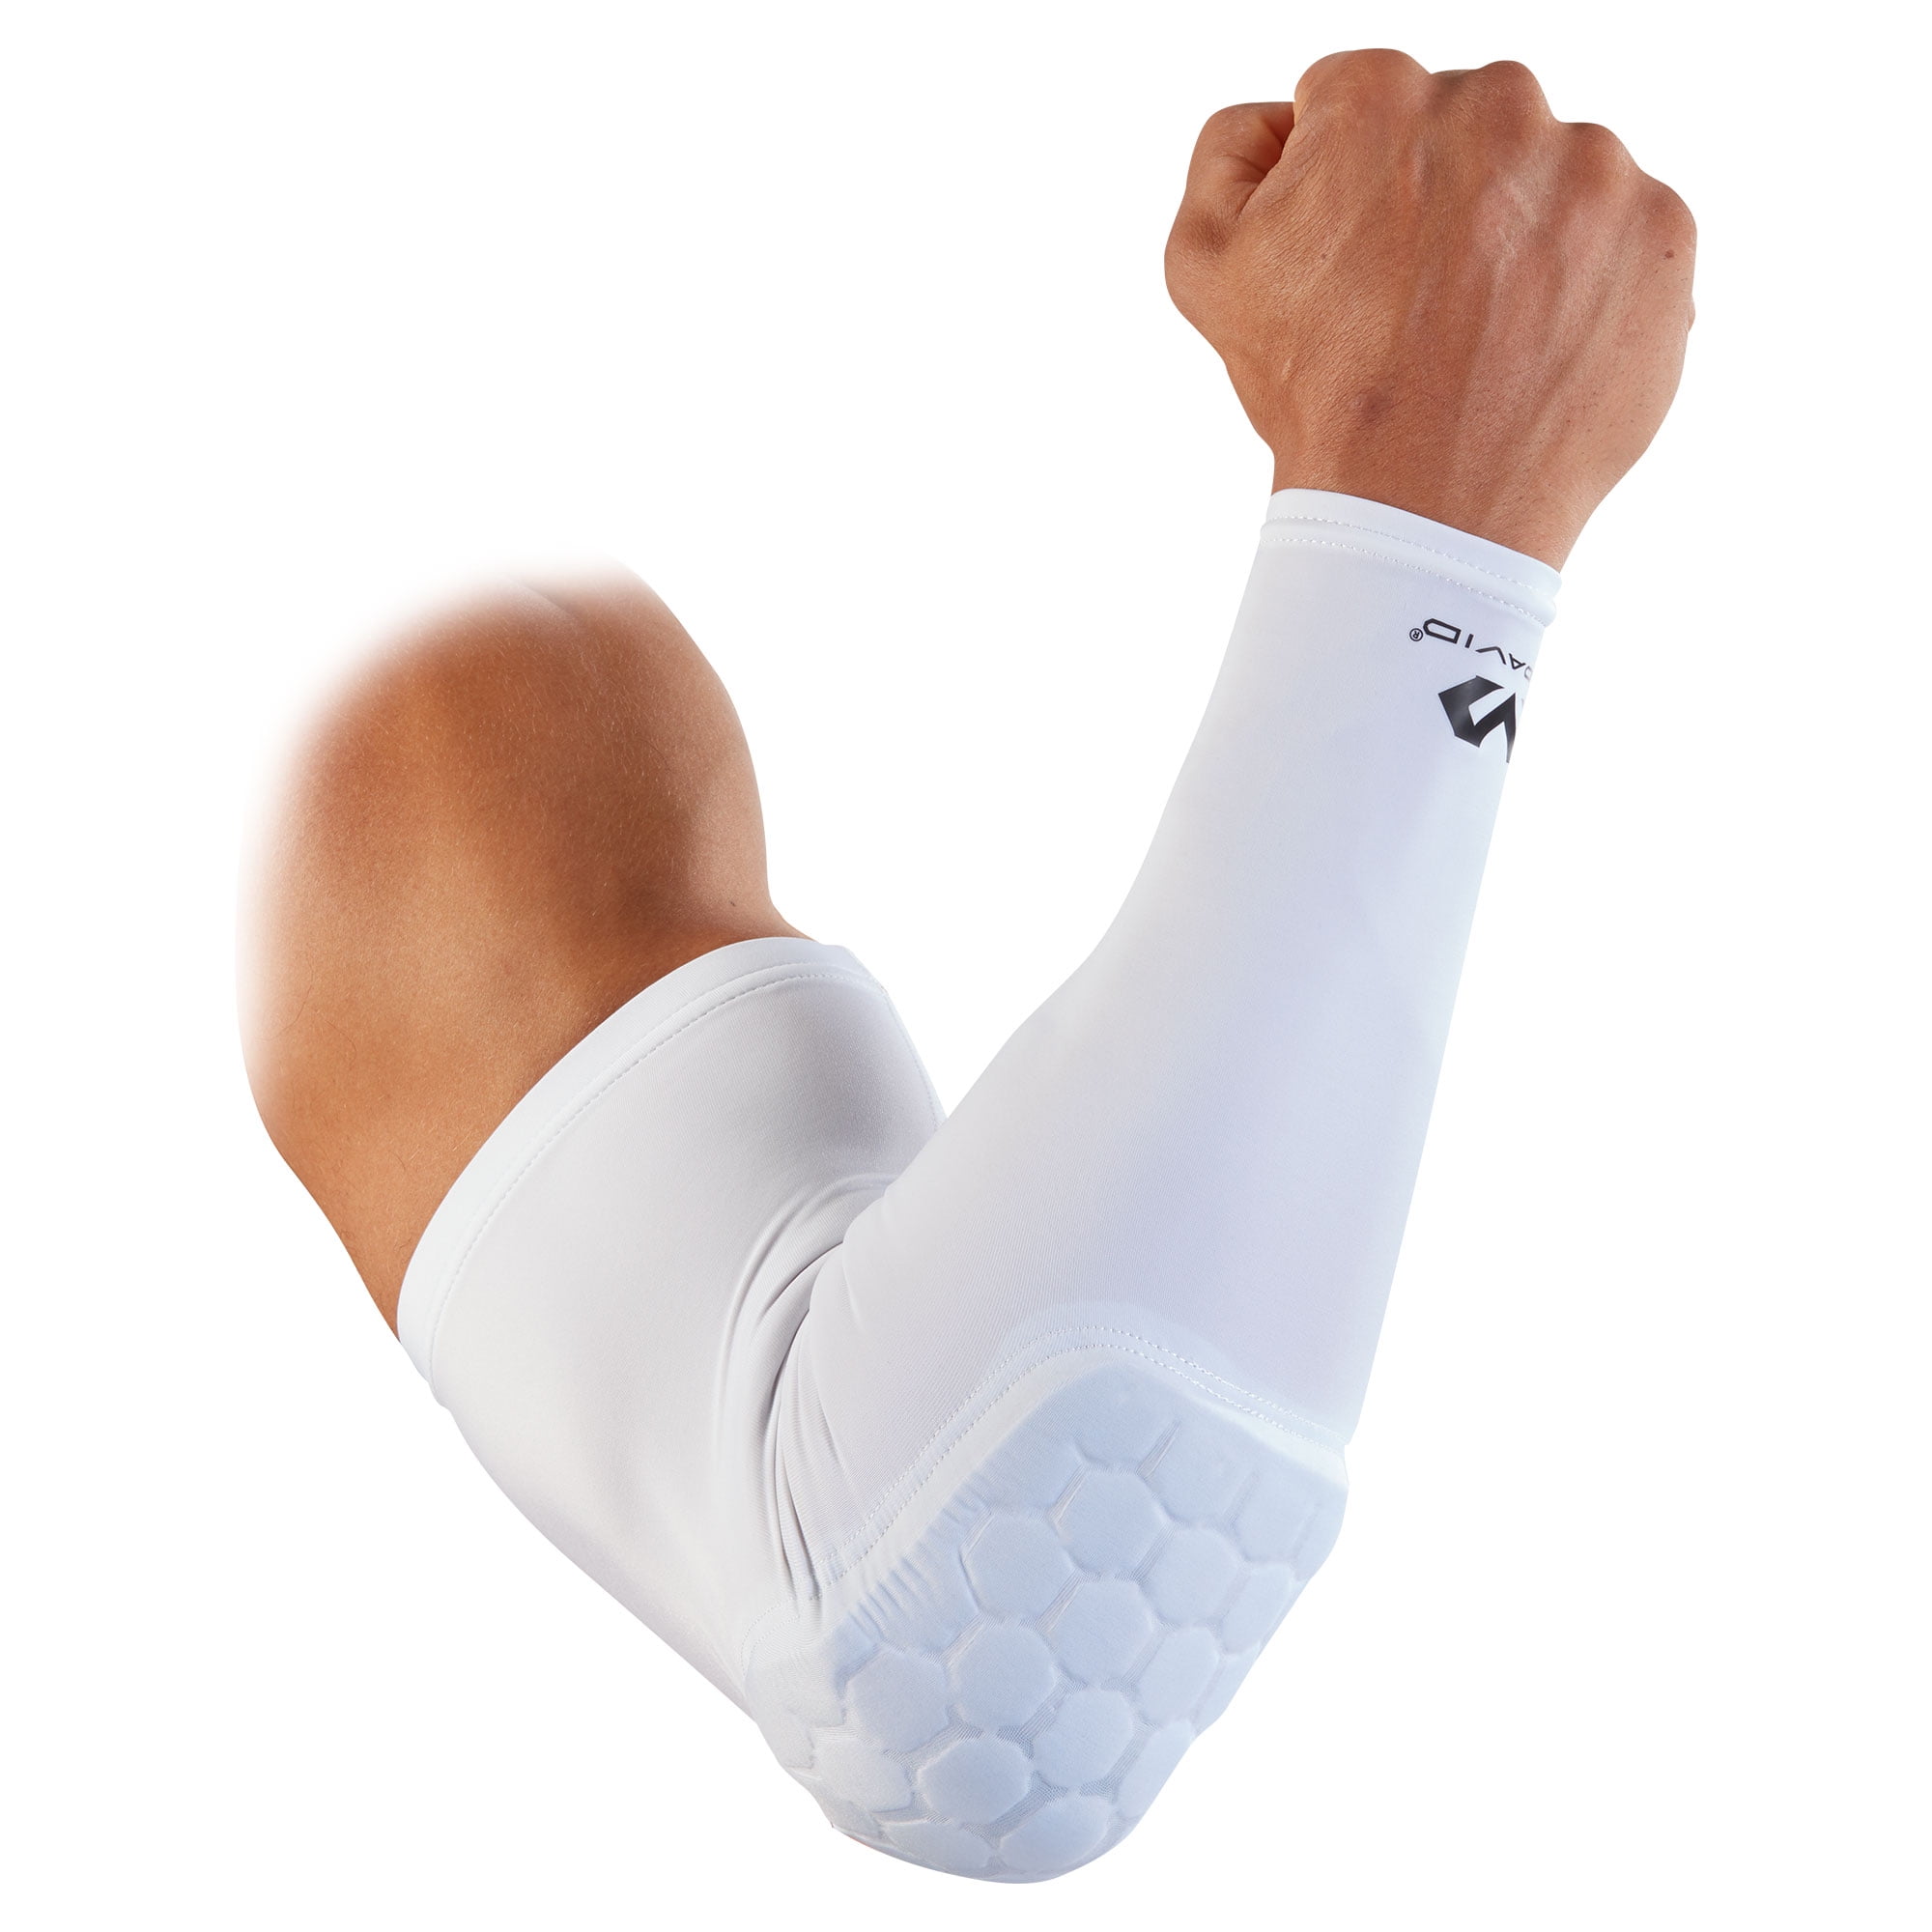 McDavid Arm HEX Tech Padded Protective Compression Sleeve White